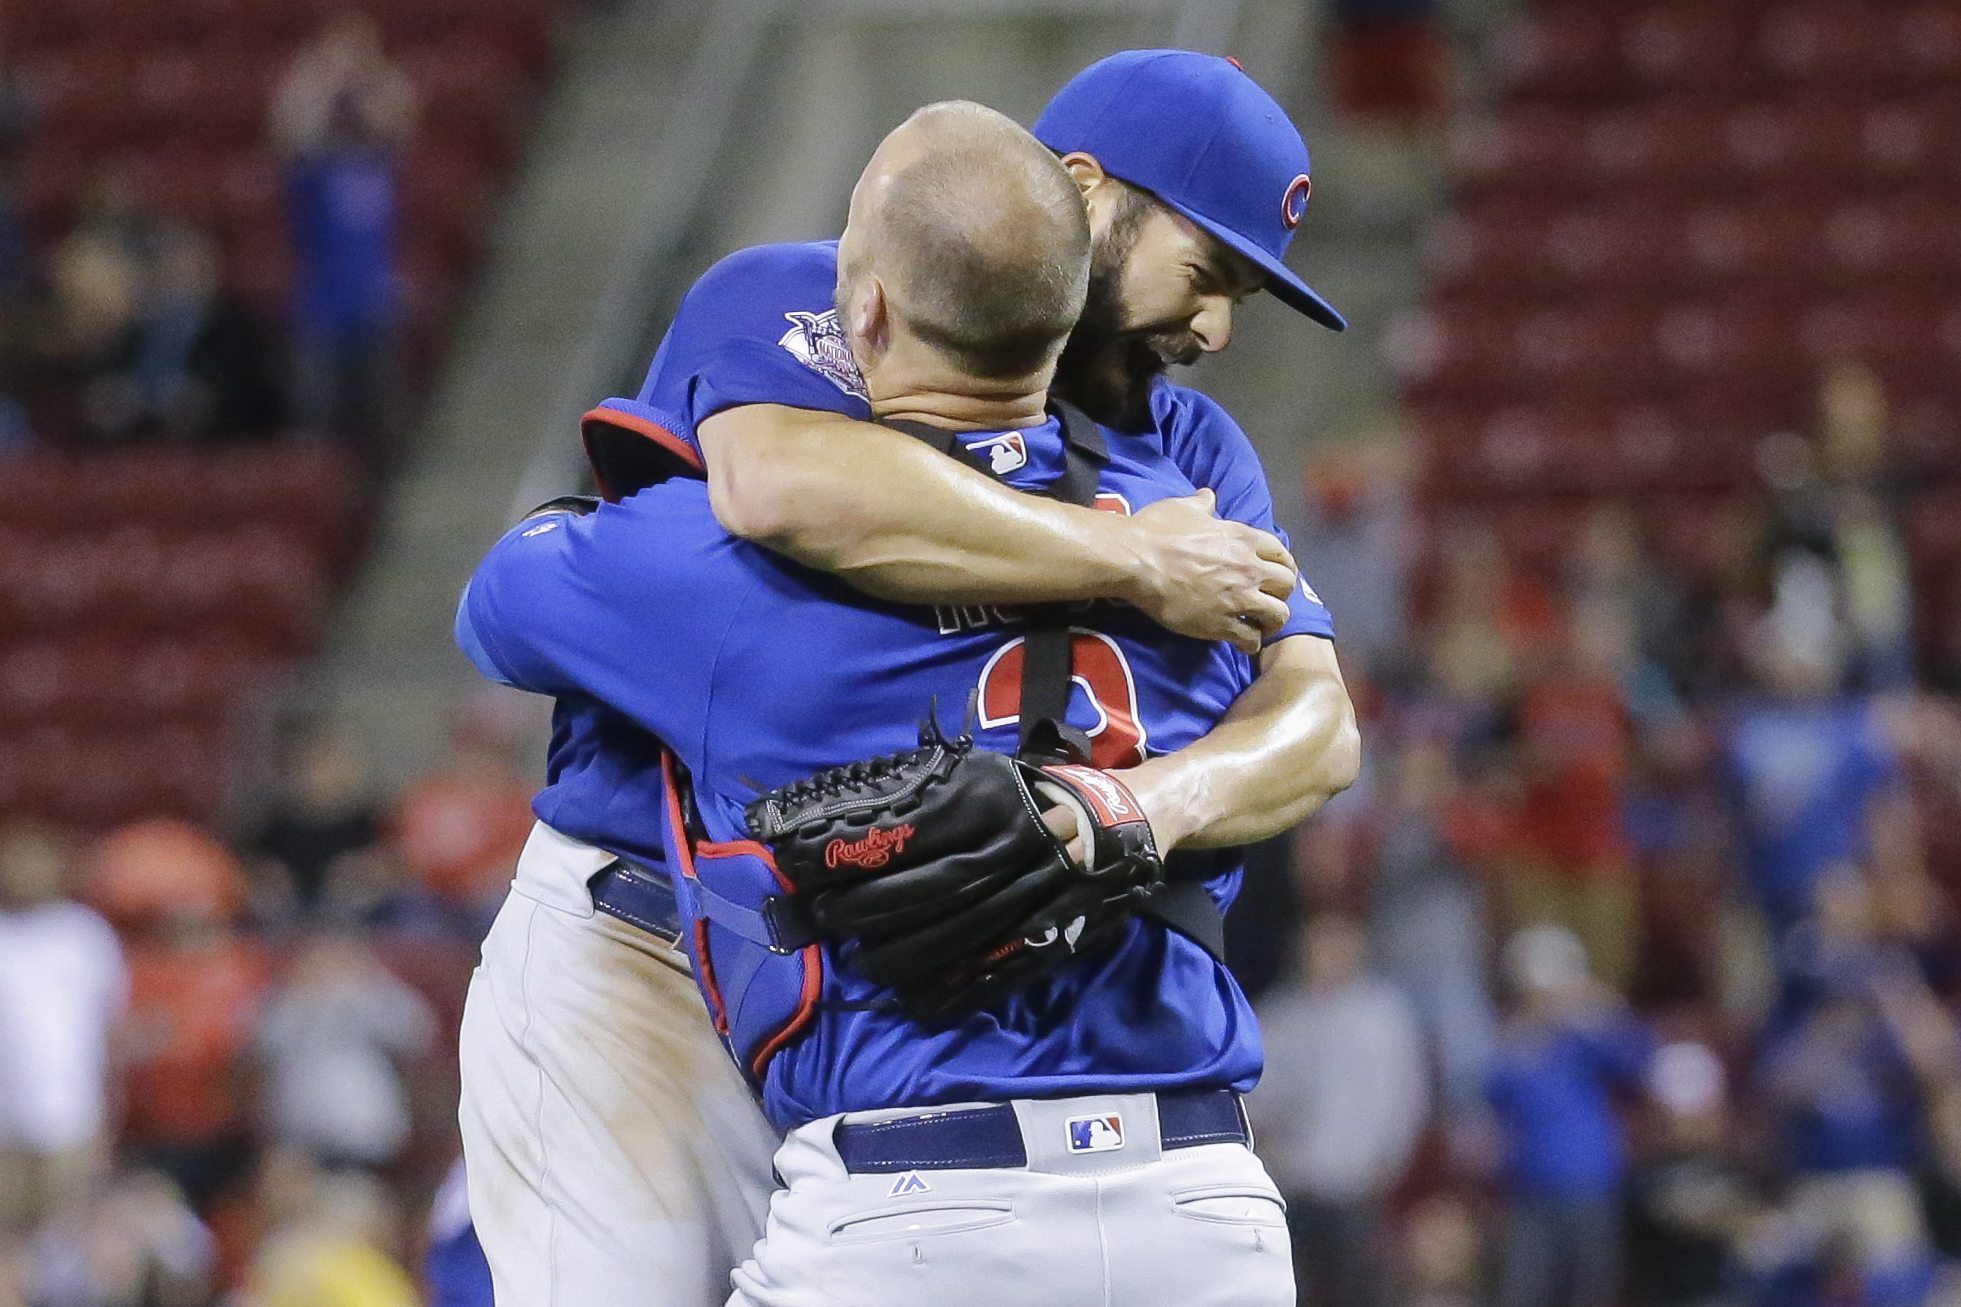 Chicago Cubs starting pitcher Jake Arrieta, left, celebrates with catcher David Ross after the final out of his no-hitter in a baseball game against the Cincinnati Reds, Thursday, April 21, 2016, in Cincinnati. The Cubs won 16-0.